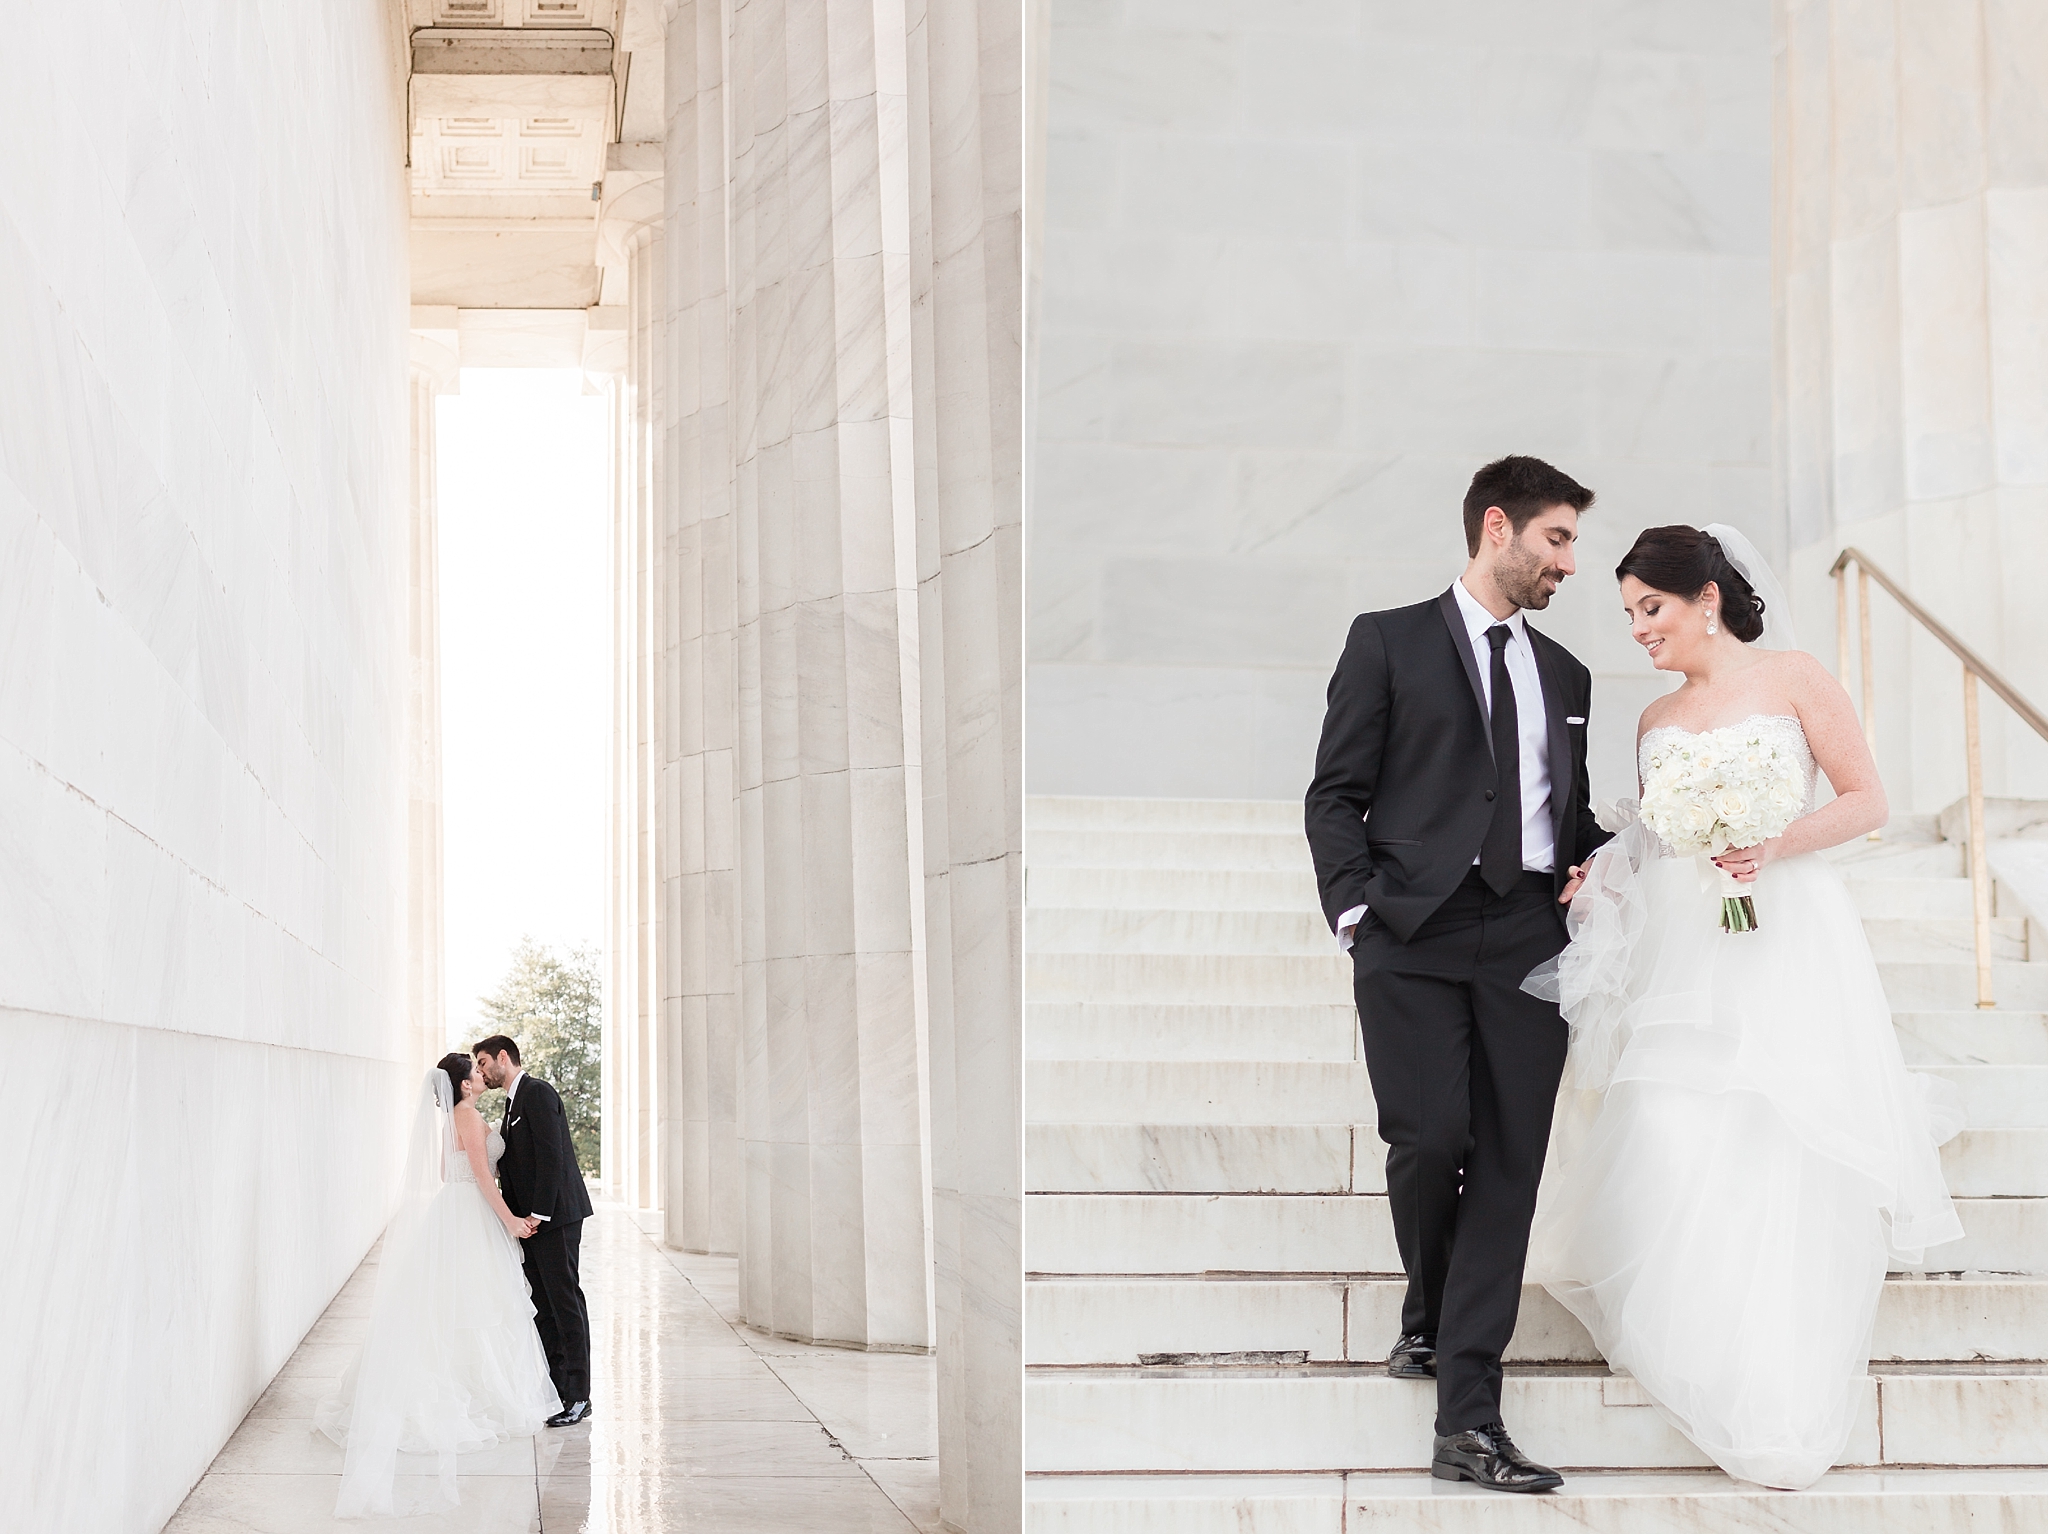 Washington, DC wedding and anniversary photographer, Alicia Lacey, takes a look back on the best couples portraits of the 2016 season.